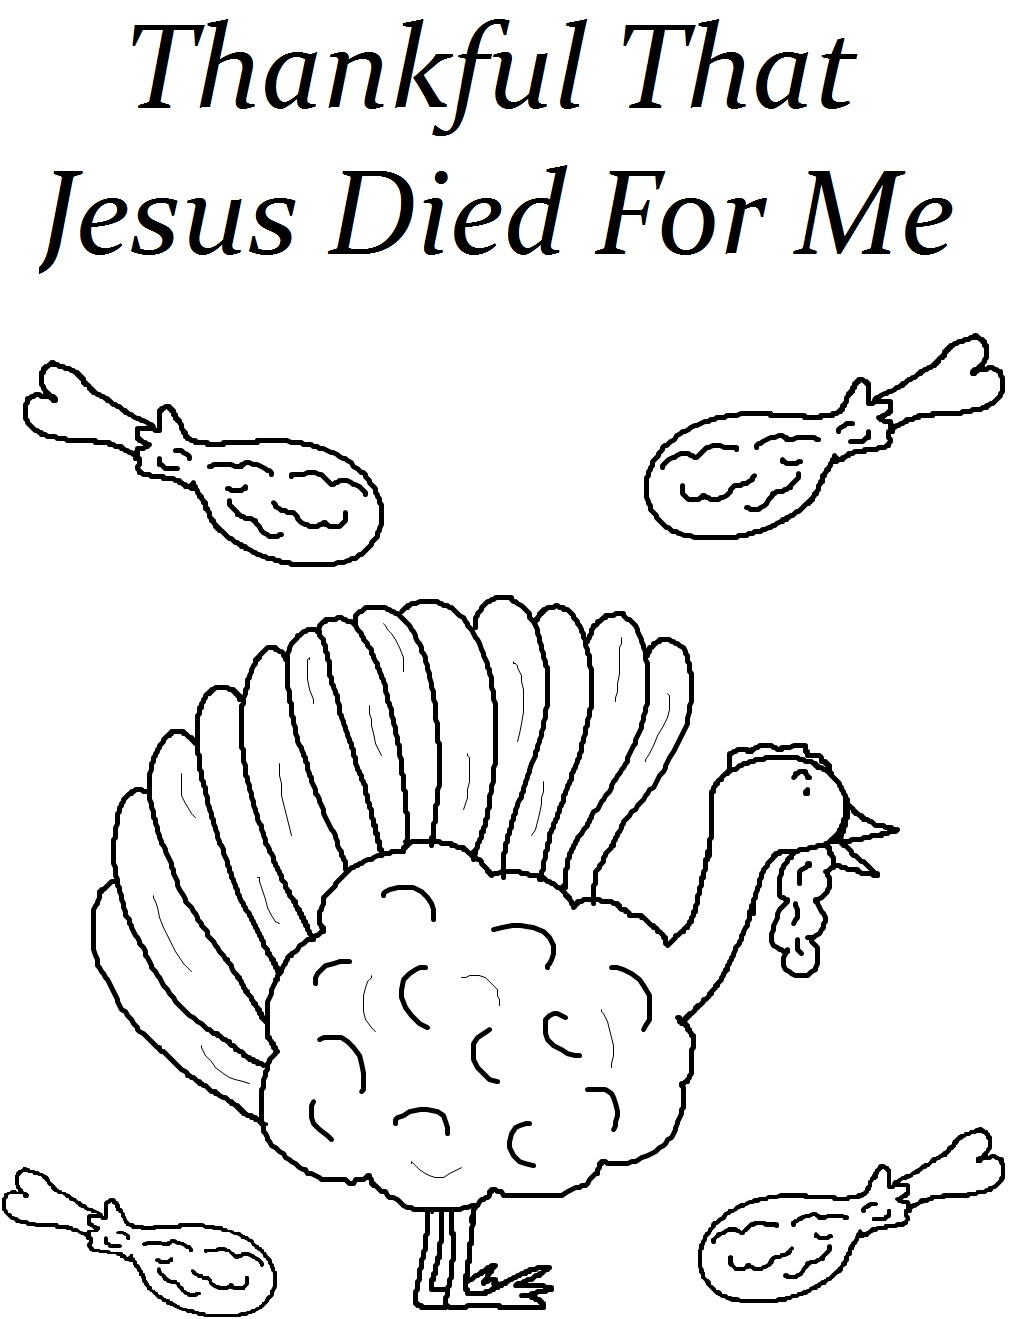 Free Printable Thanksgiving Coloring Pages For Sunday School